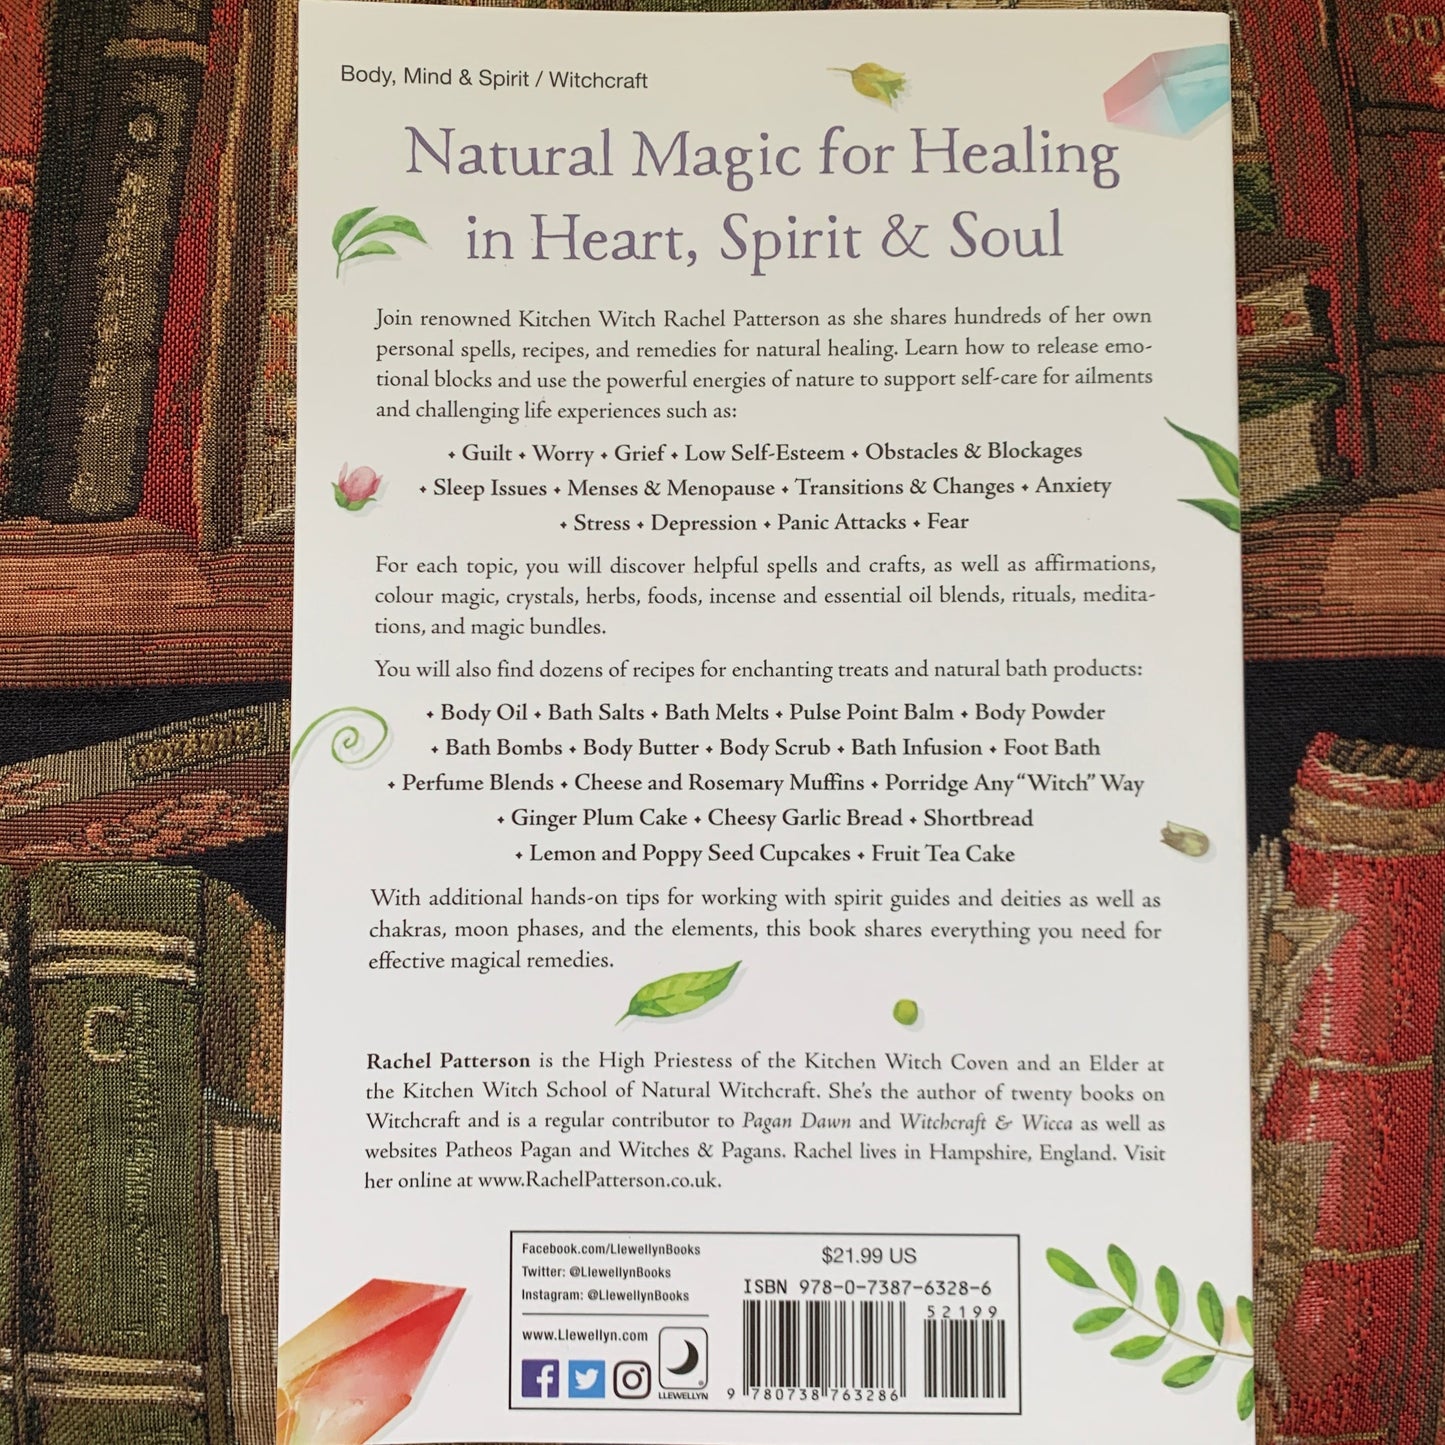 CURATIVE MAGIC- A WITCH'S GUIDE TO SELF DISCOVERY, CARE AND HEALING